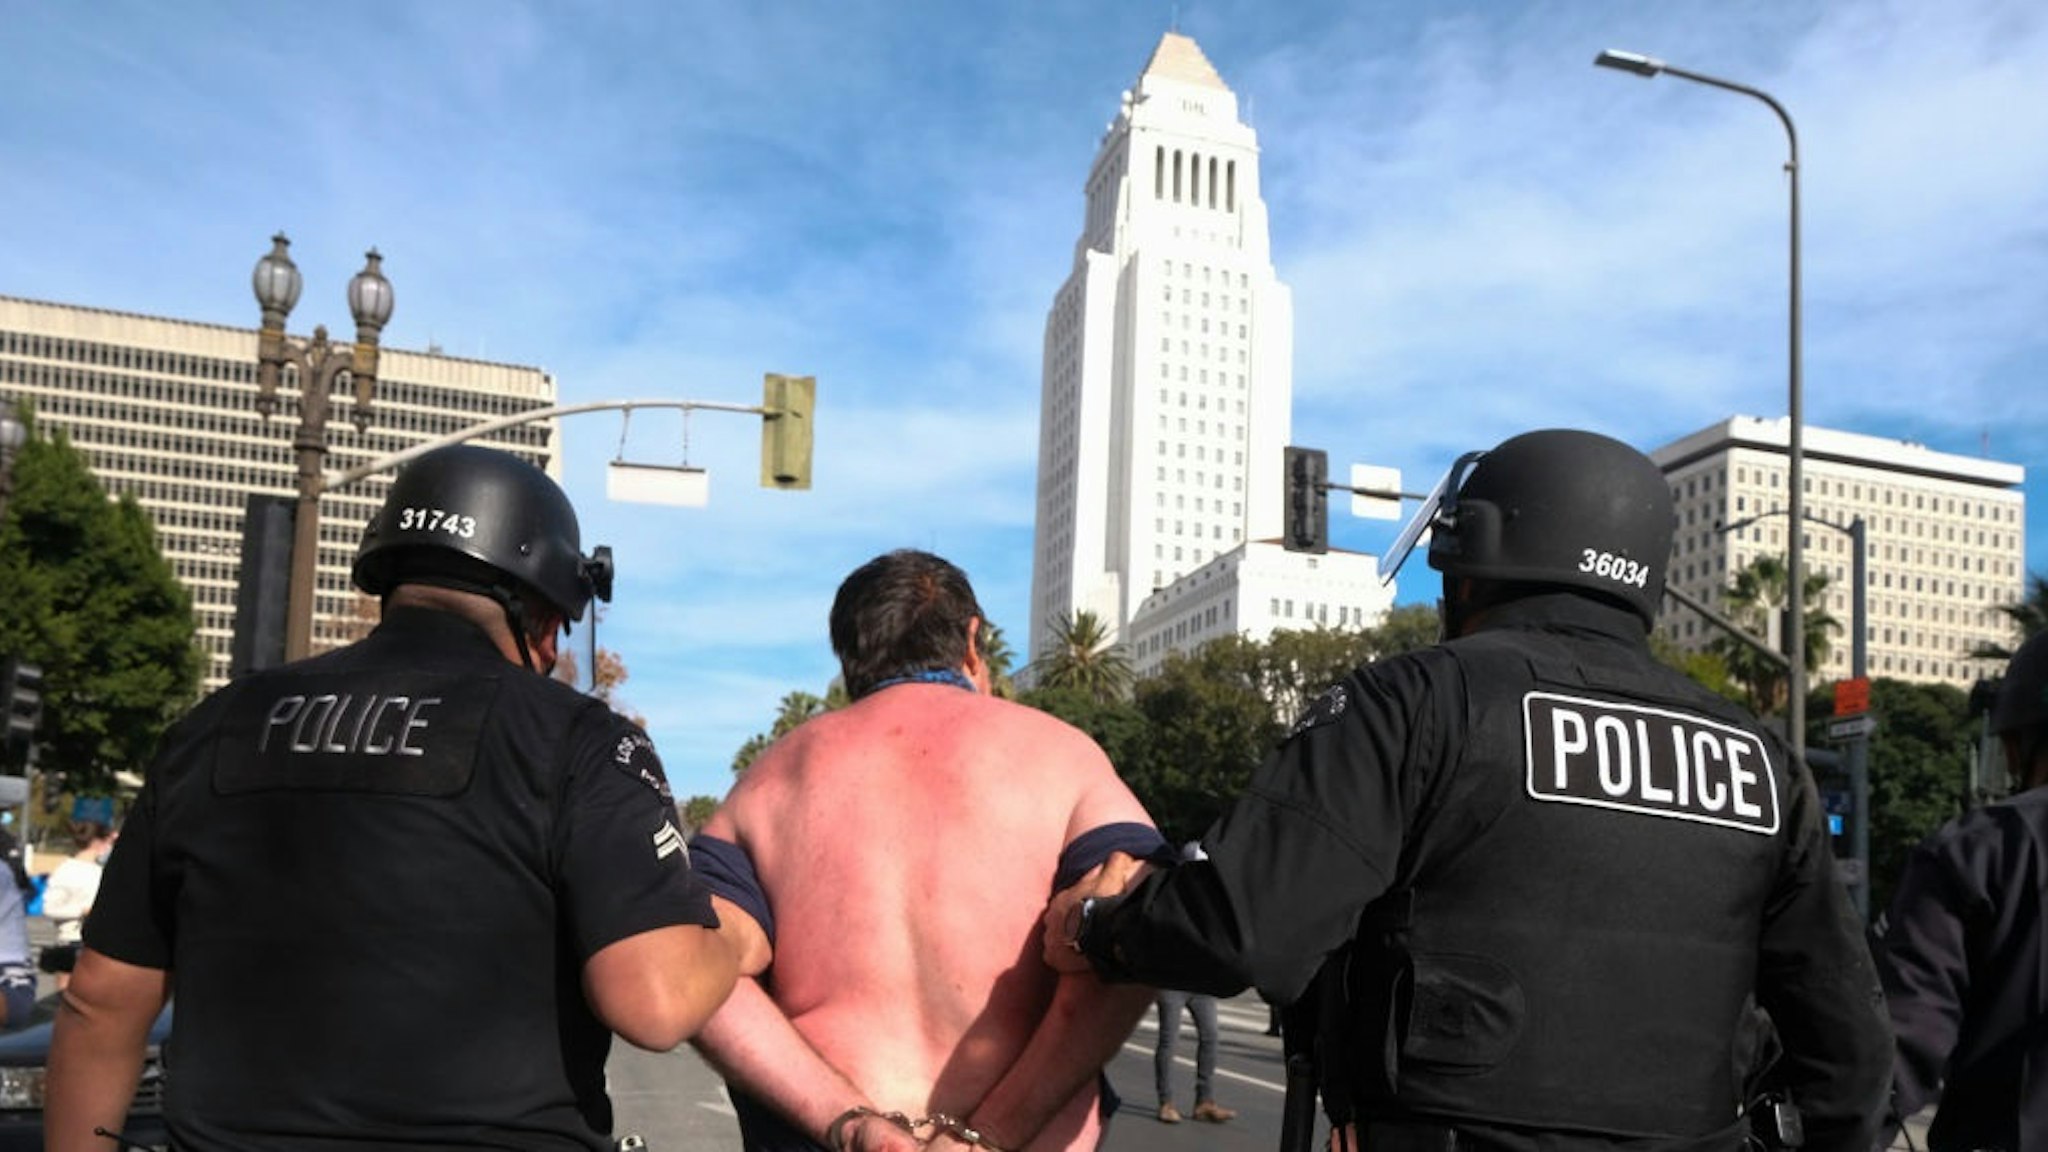 Los Angeles City Hall is seen as Police officers detain a protester caught in a fight during a protest in support of US President Donald Trump in Los Angeles on January 6, 2021.